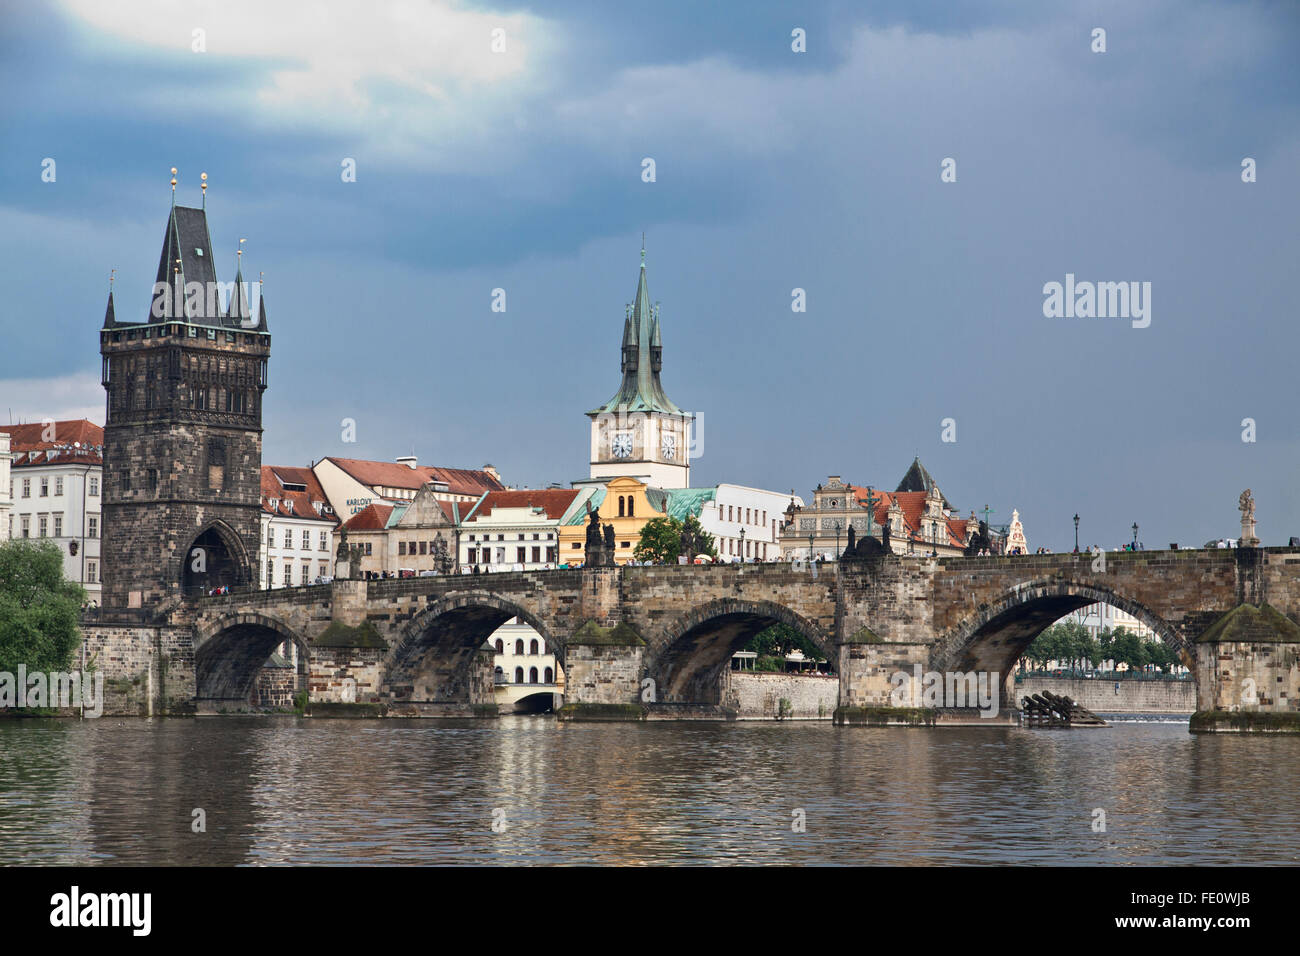 The famous Charles Bridge The Old Town Bridge Tower started in 1357 under the auspices of King Charles IV. Stock Photo